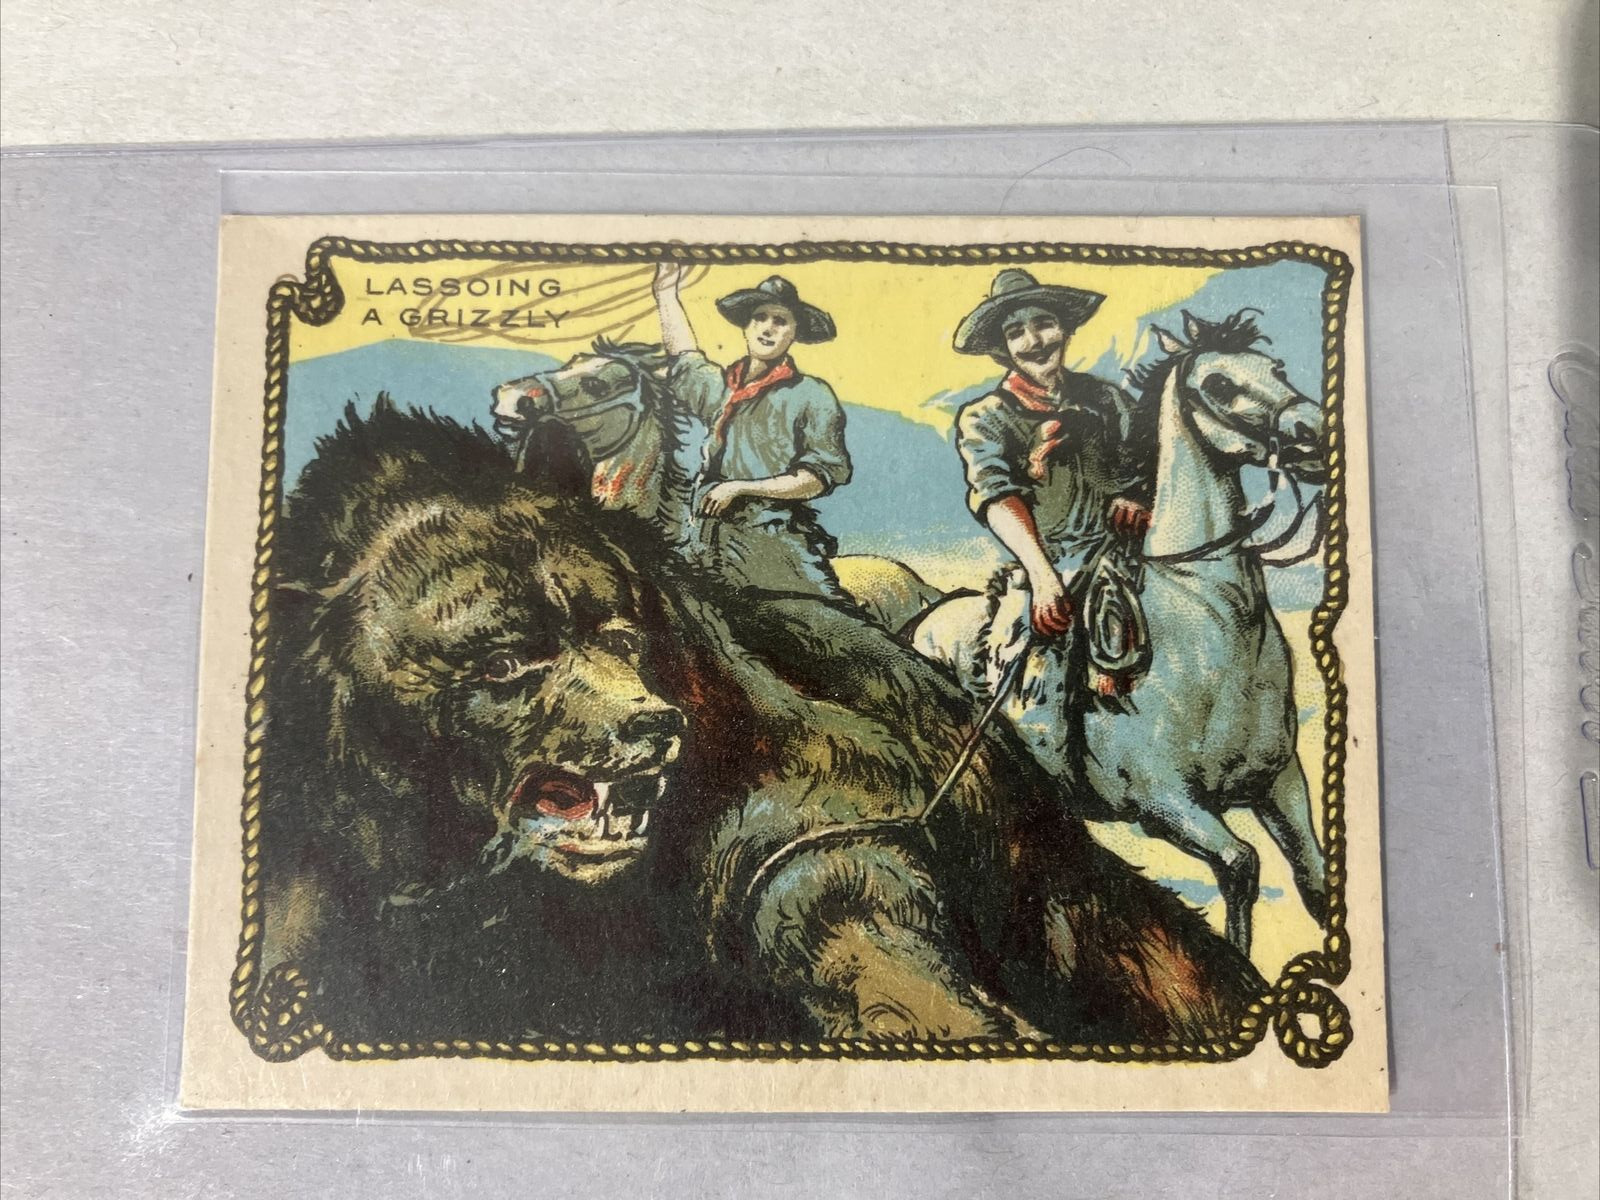 1909-12 Hassan Cowboy Series Tobacco T53 Lassoing A Grizzly RARE CANADIAN (NM)